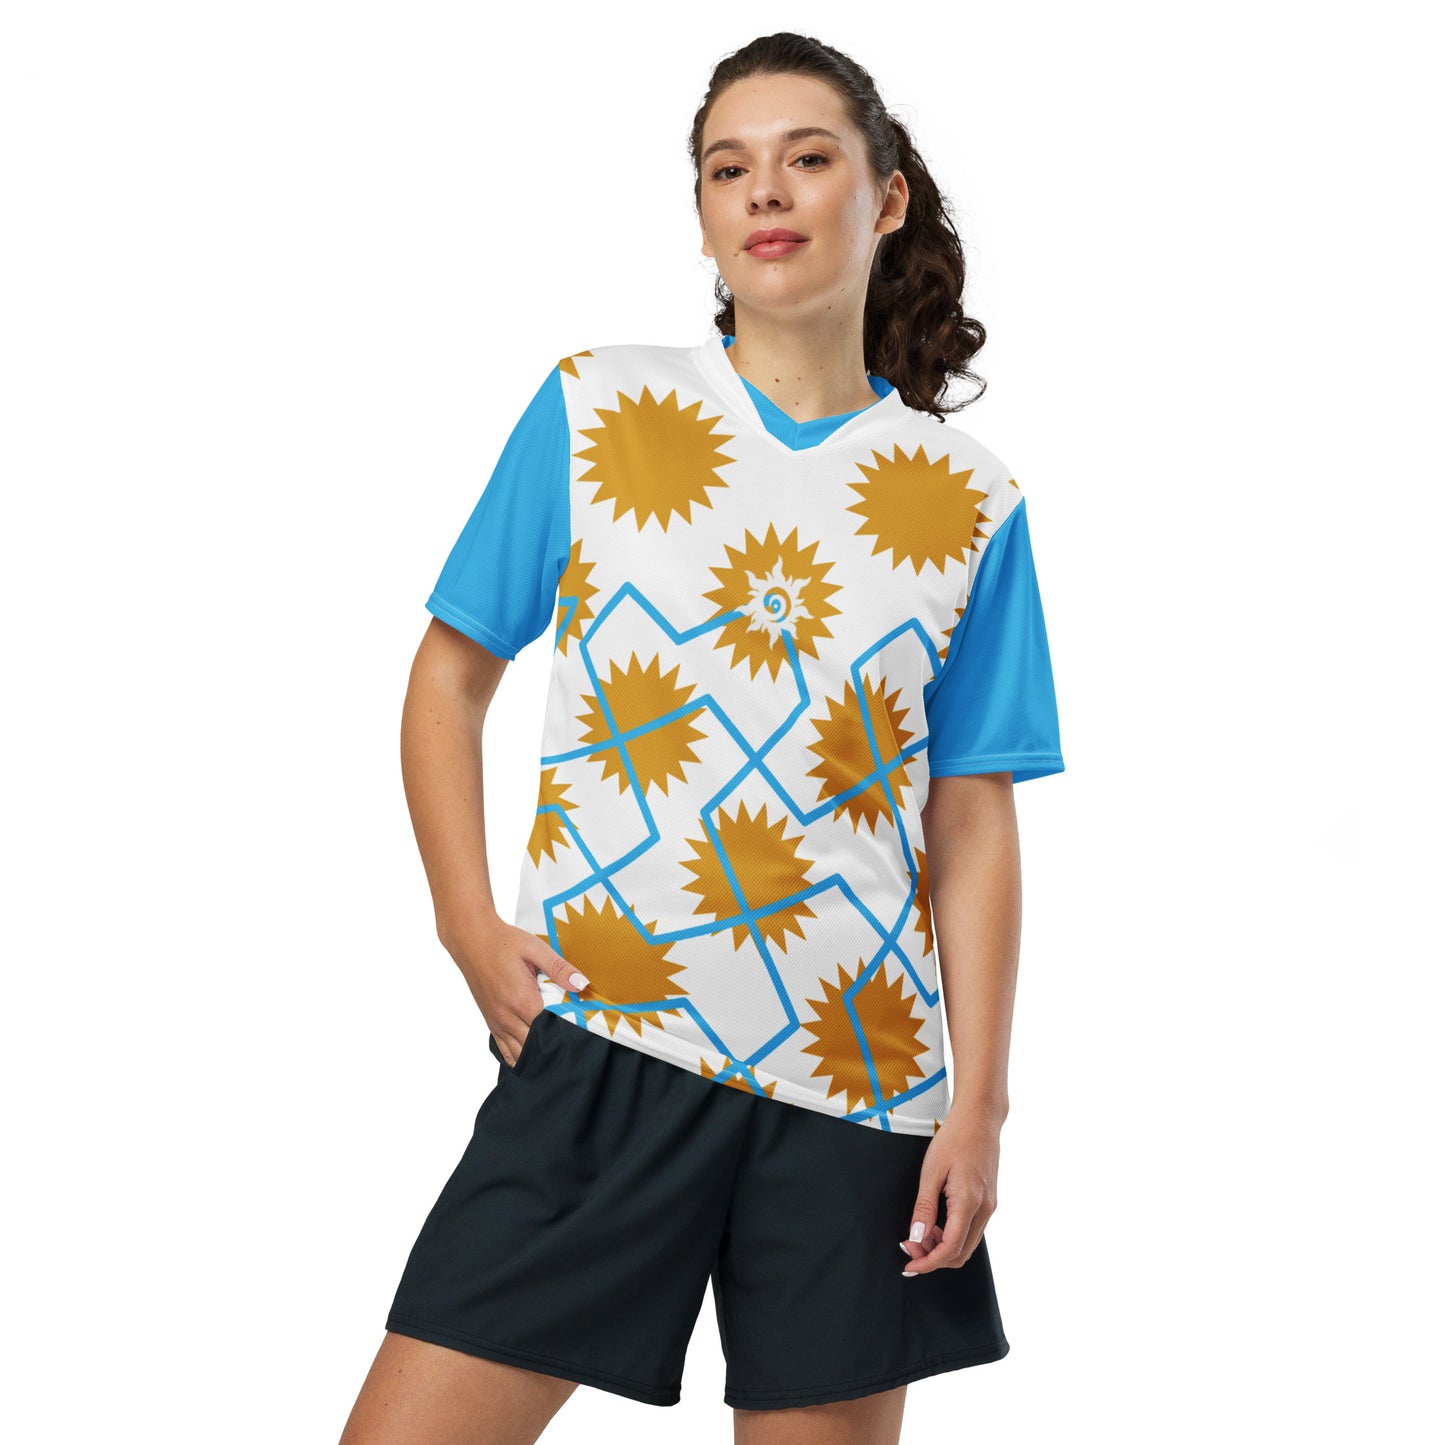 Recycled Unisex Sports Jersey ActSun 2